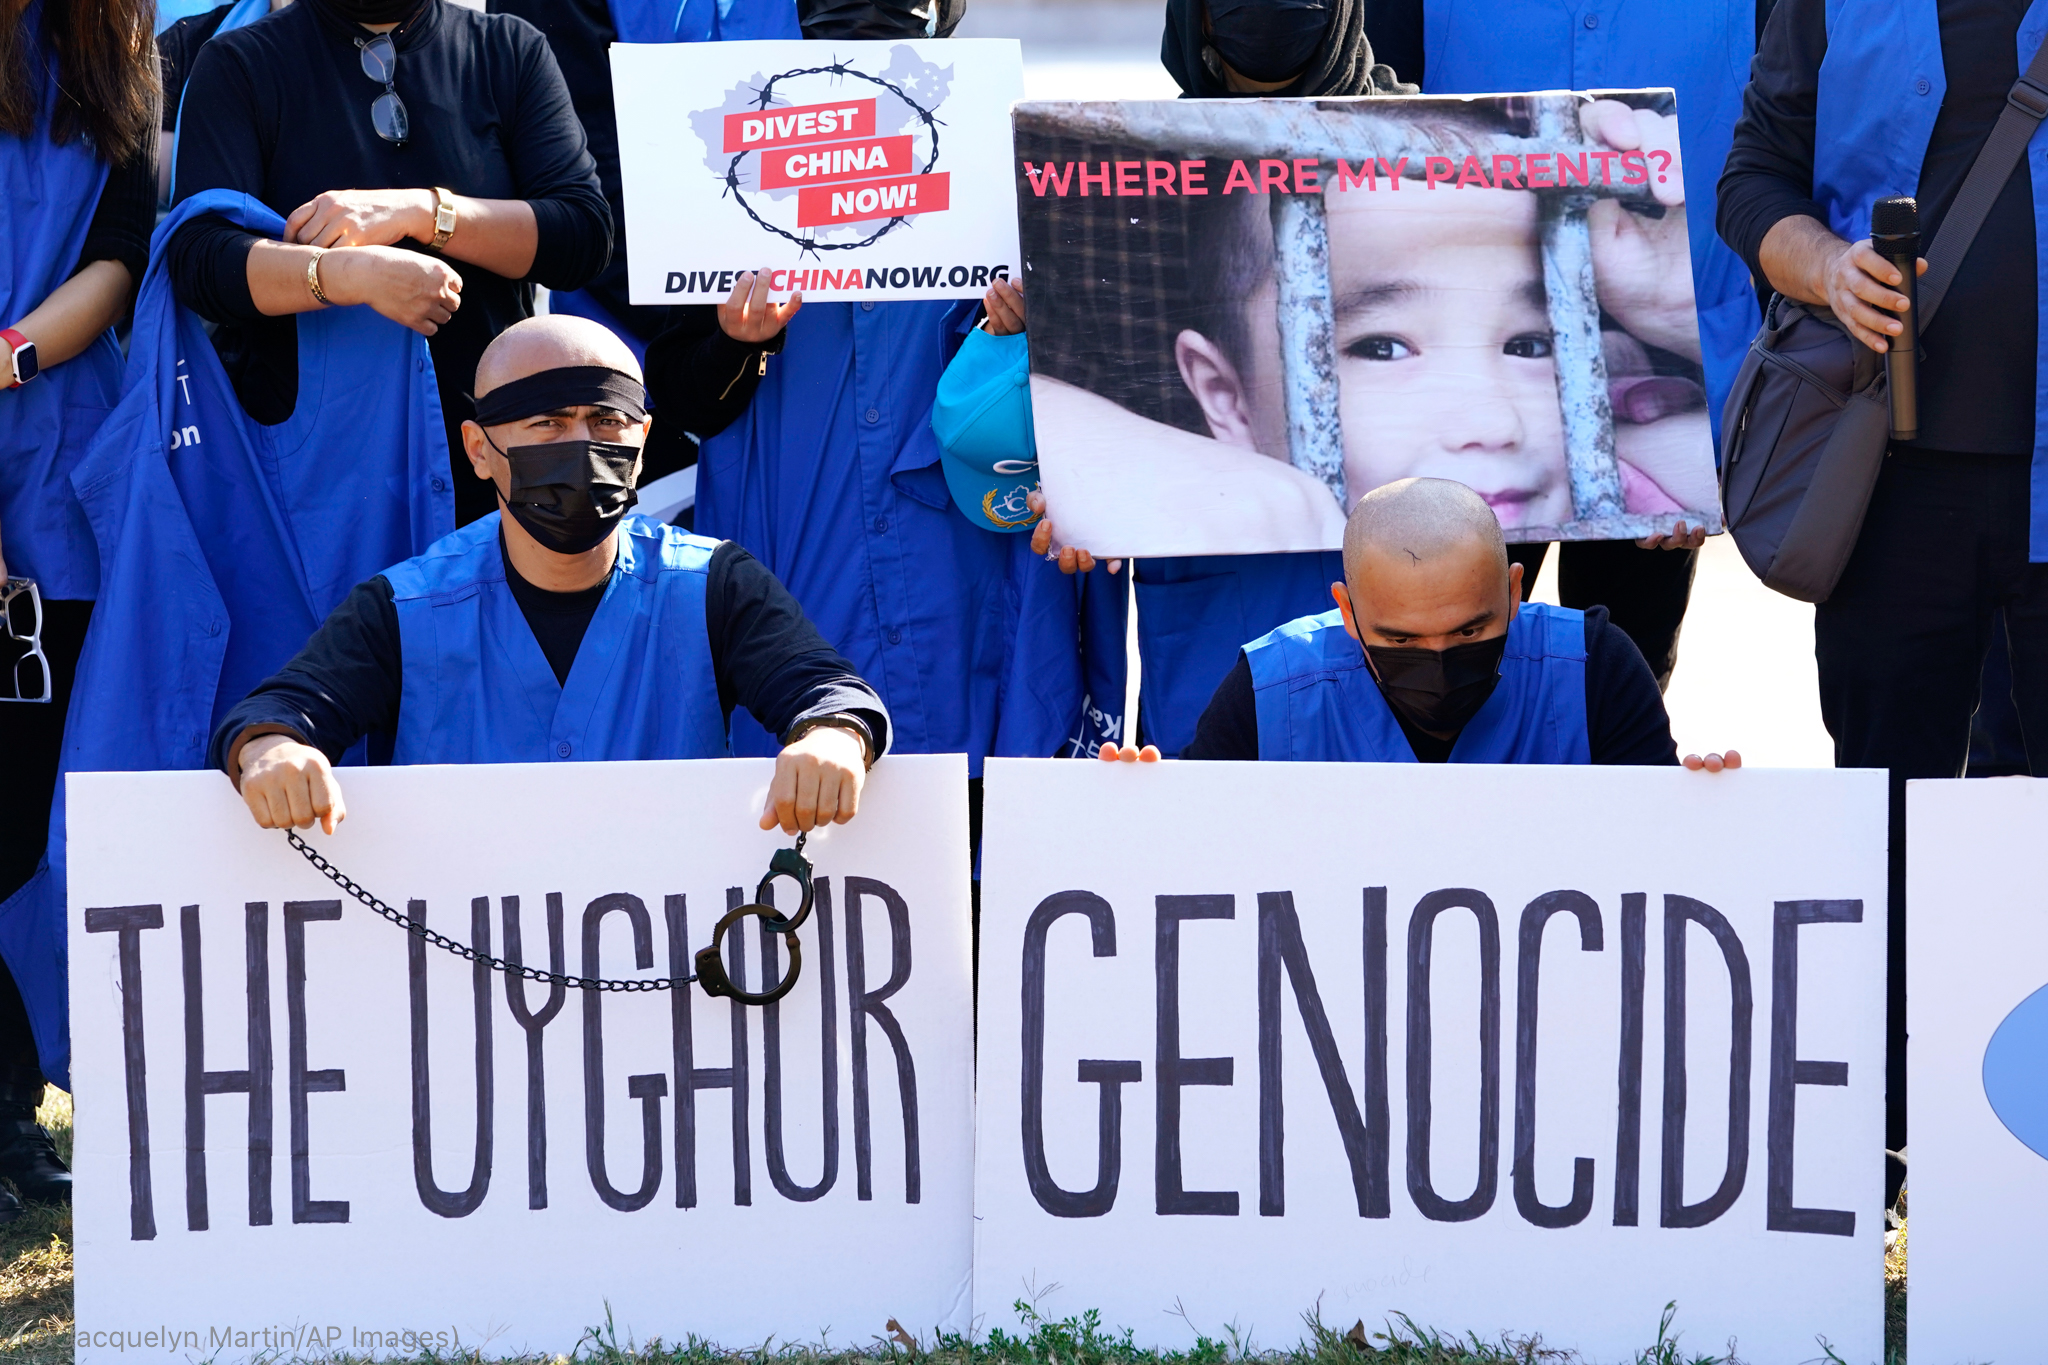 Facing China's Uyghur genocide at the UN, money talks and Islam walks 4